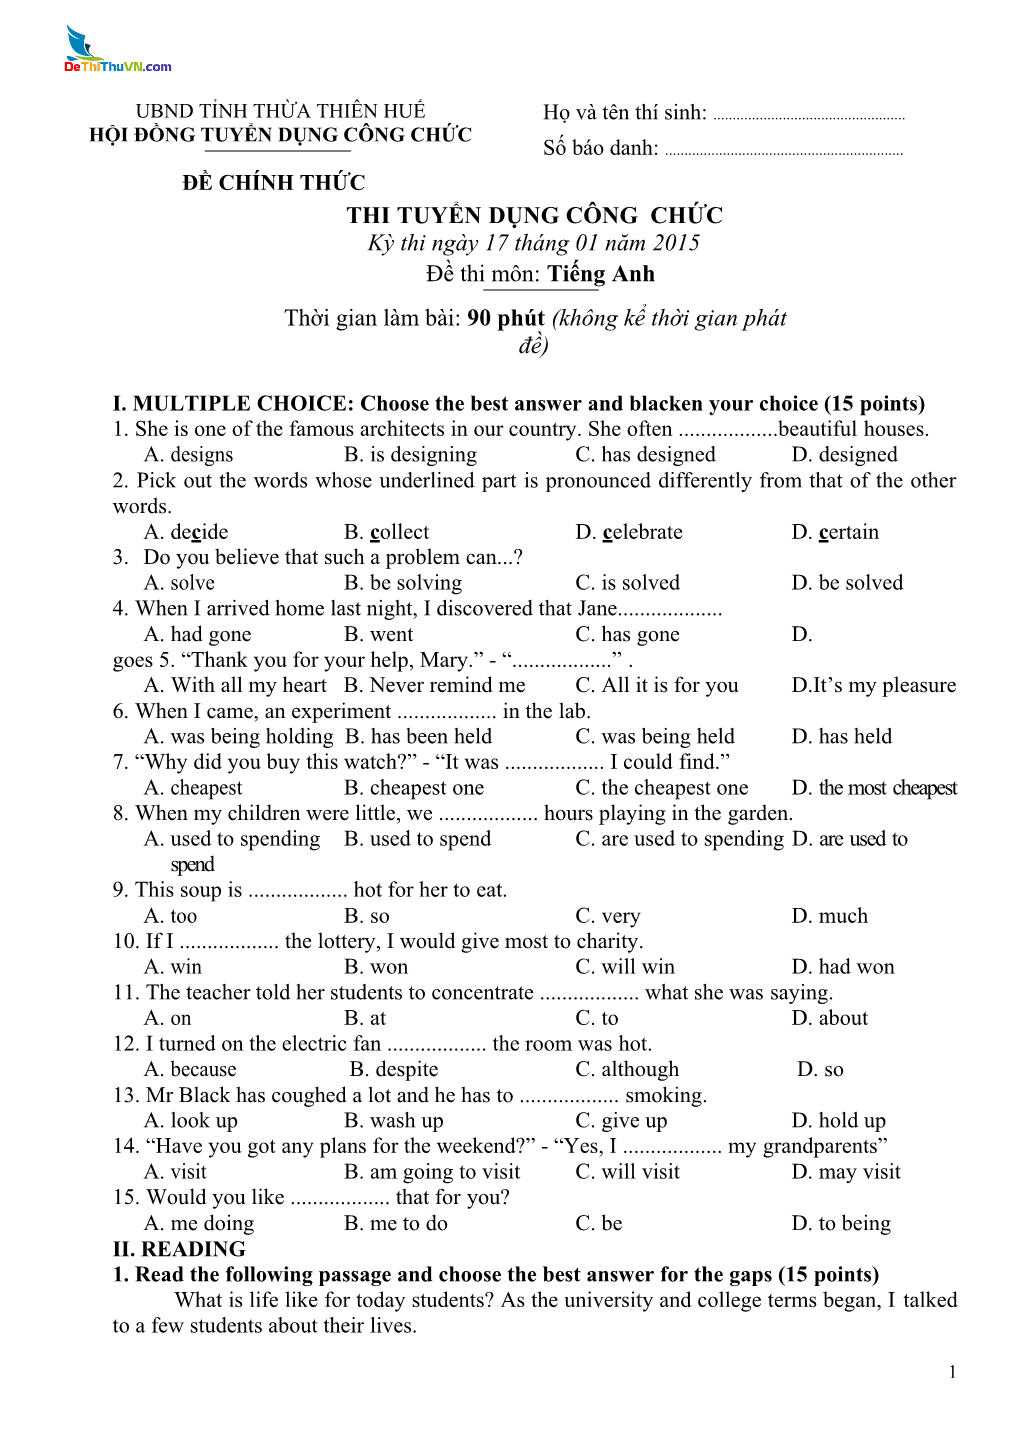 I.MULTIPLE CHOICE: Choose the Best Answer and Blacken Your Choice (15Points)